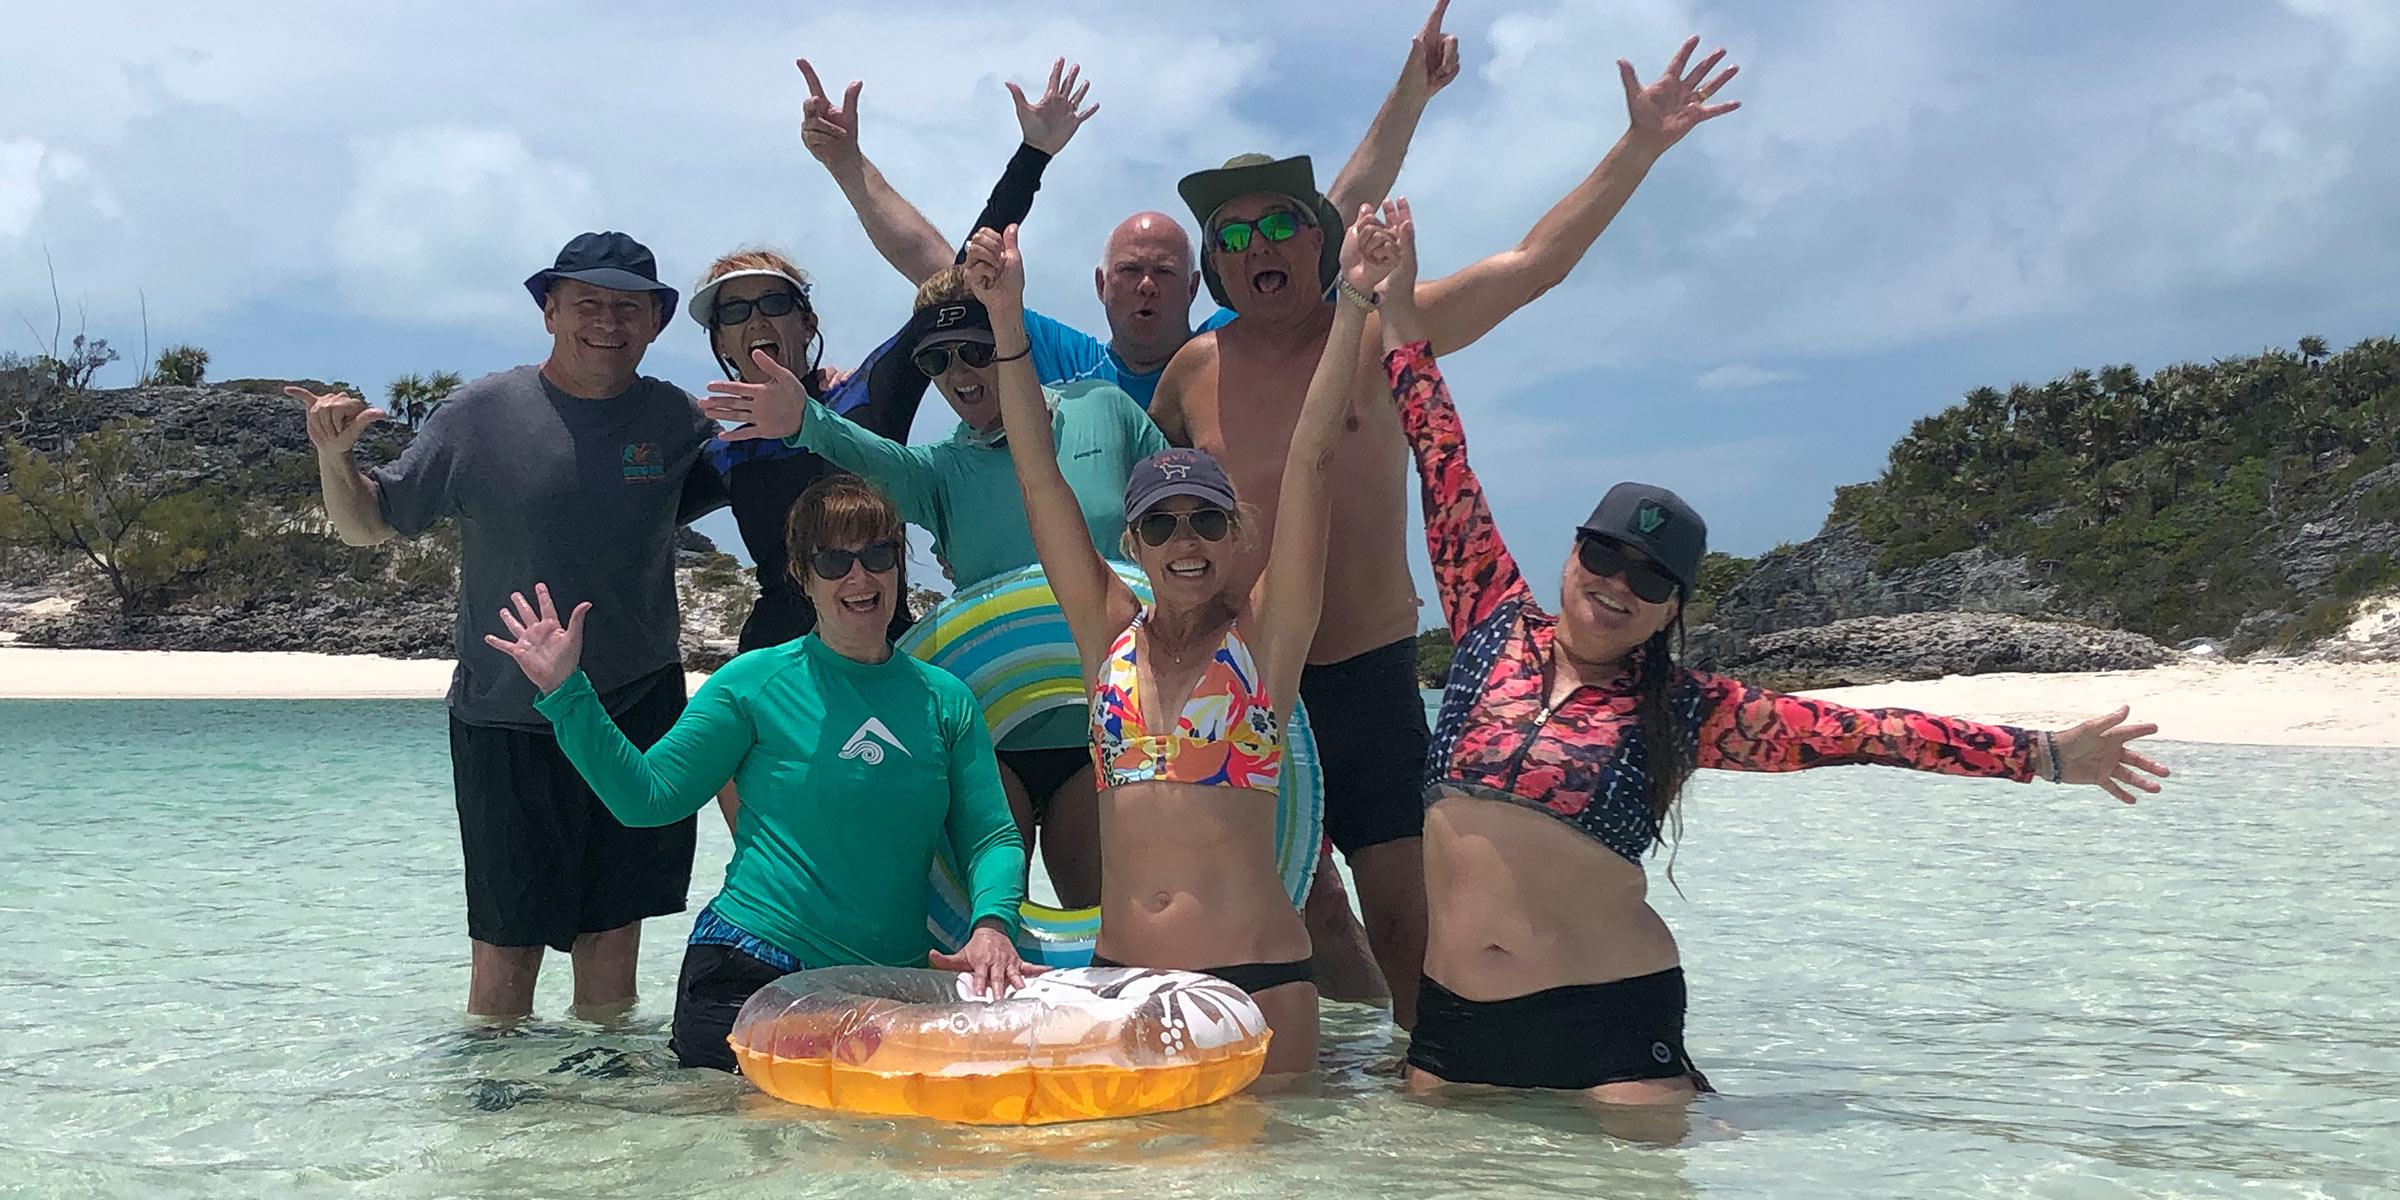 Moorings charter guest Mike Strickland and friends in the Exumas